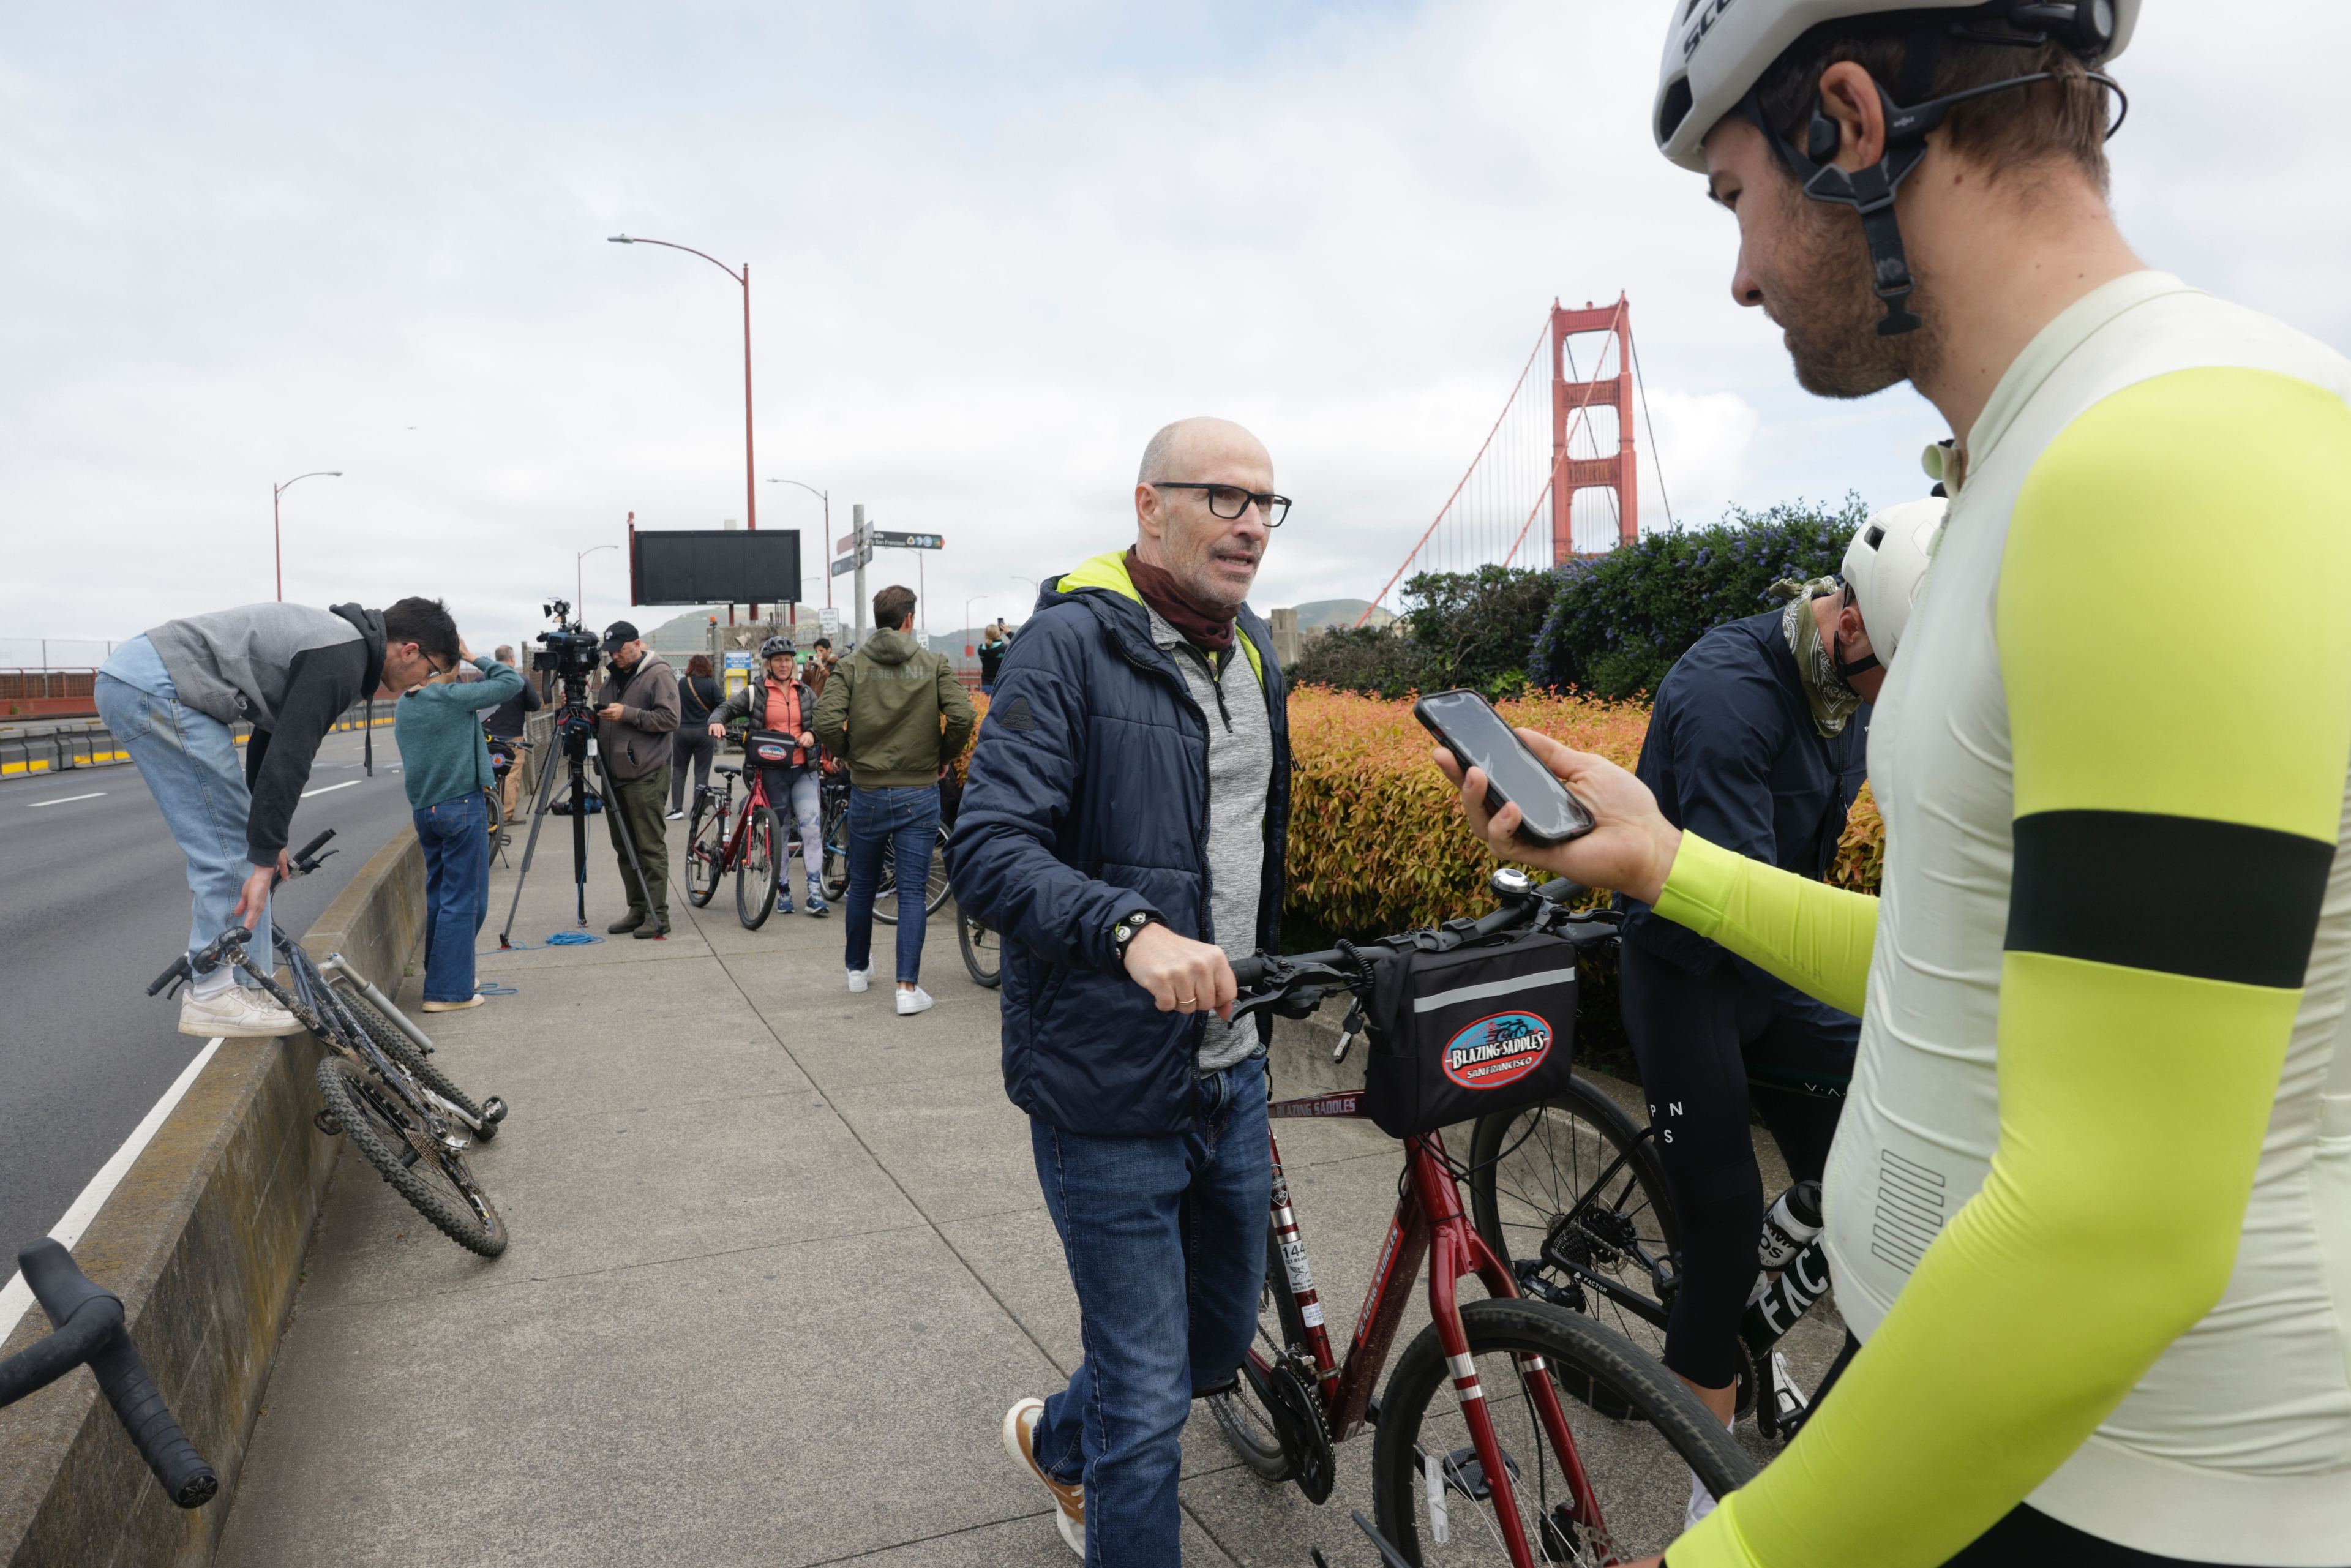 People and cyclists are near the Golden Gate Bridge; one person is looking at their phone.